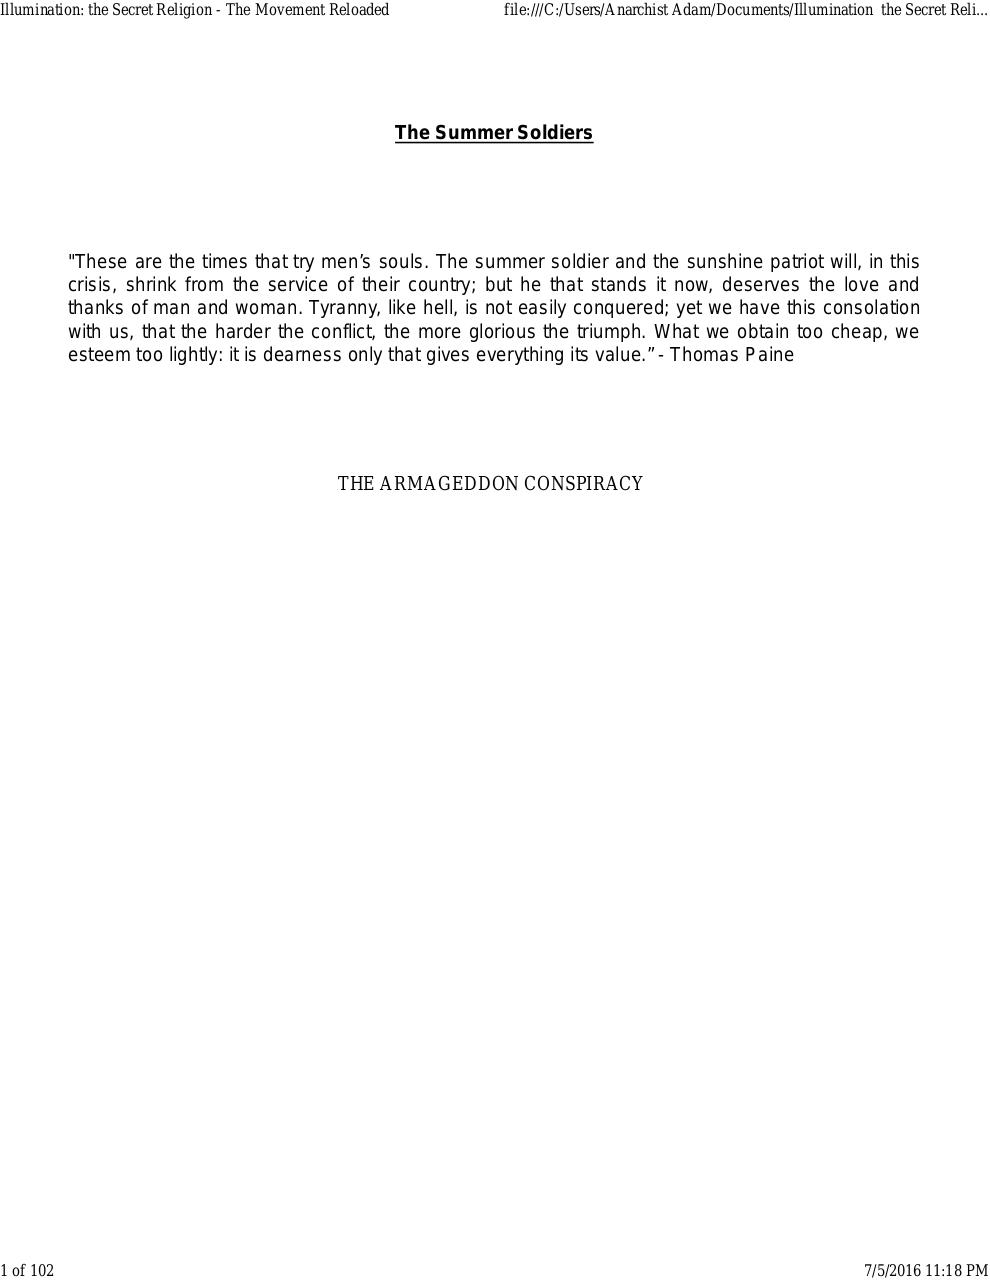 the Secret Religion - The Movement Reloaded.pdf - page 1/102